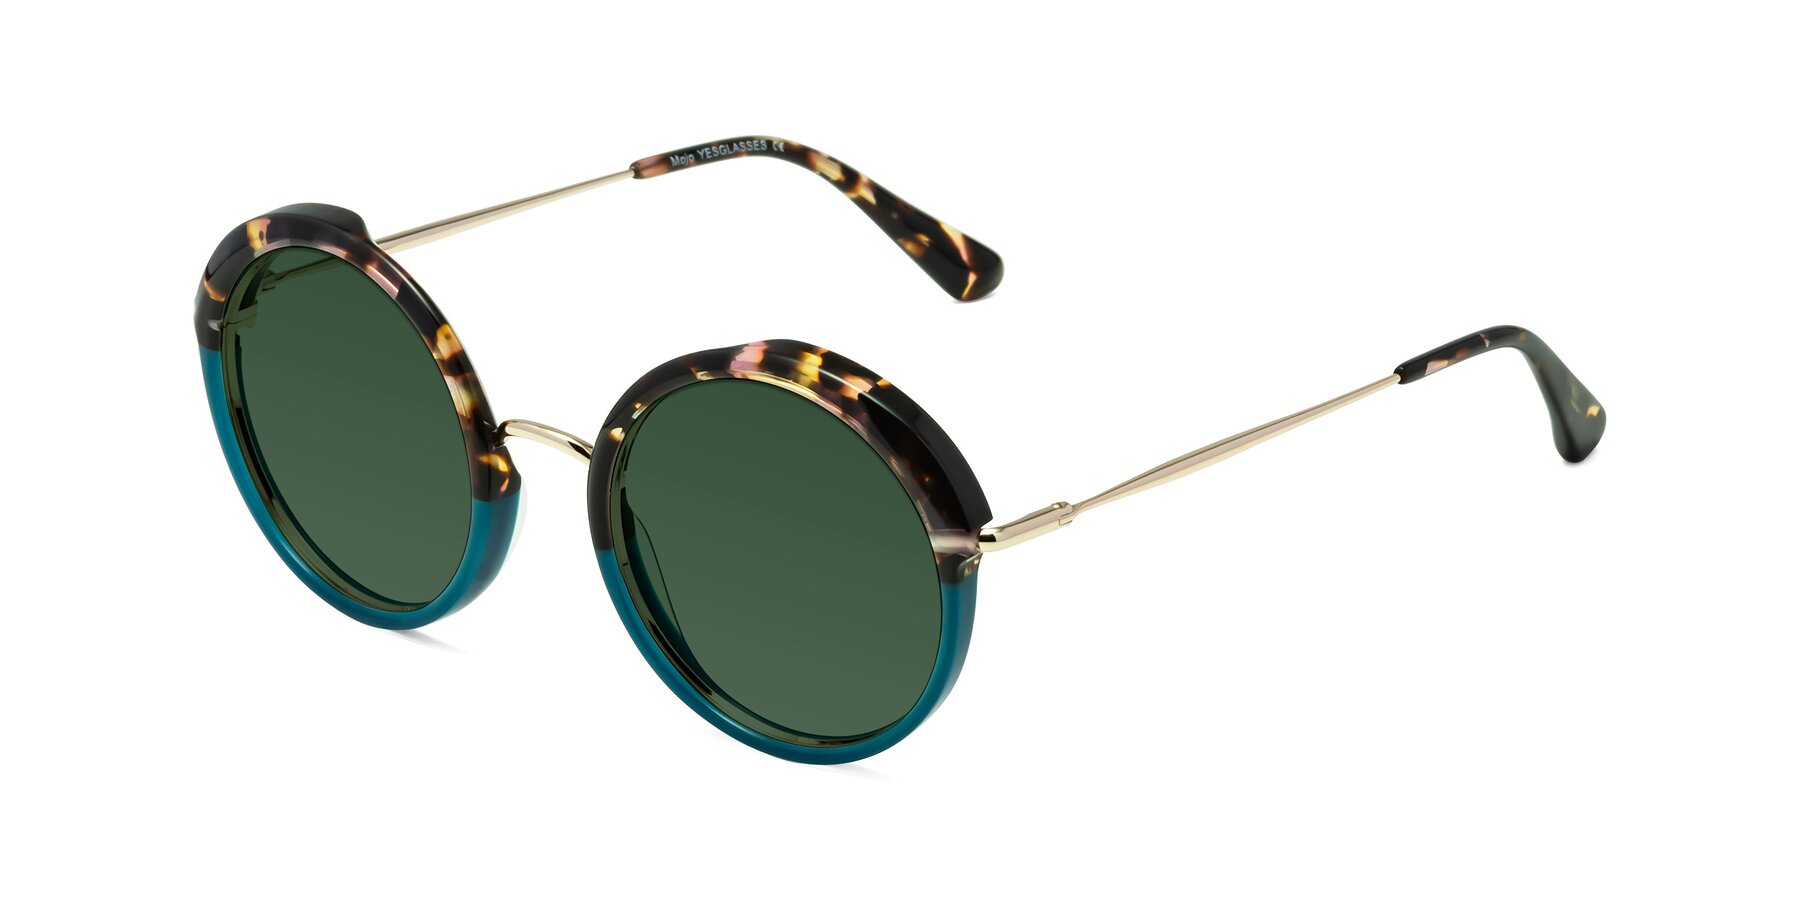 Angle of Mojo in Floral-Teal with Green Tinted Lenses